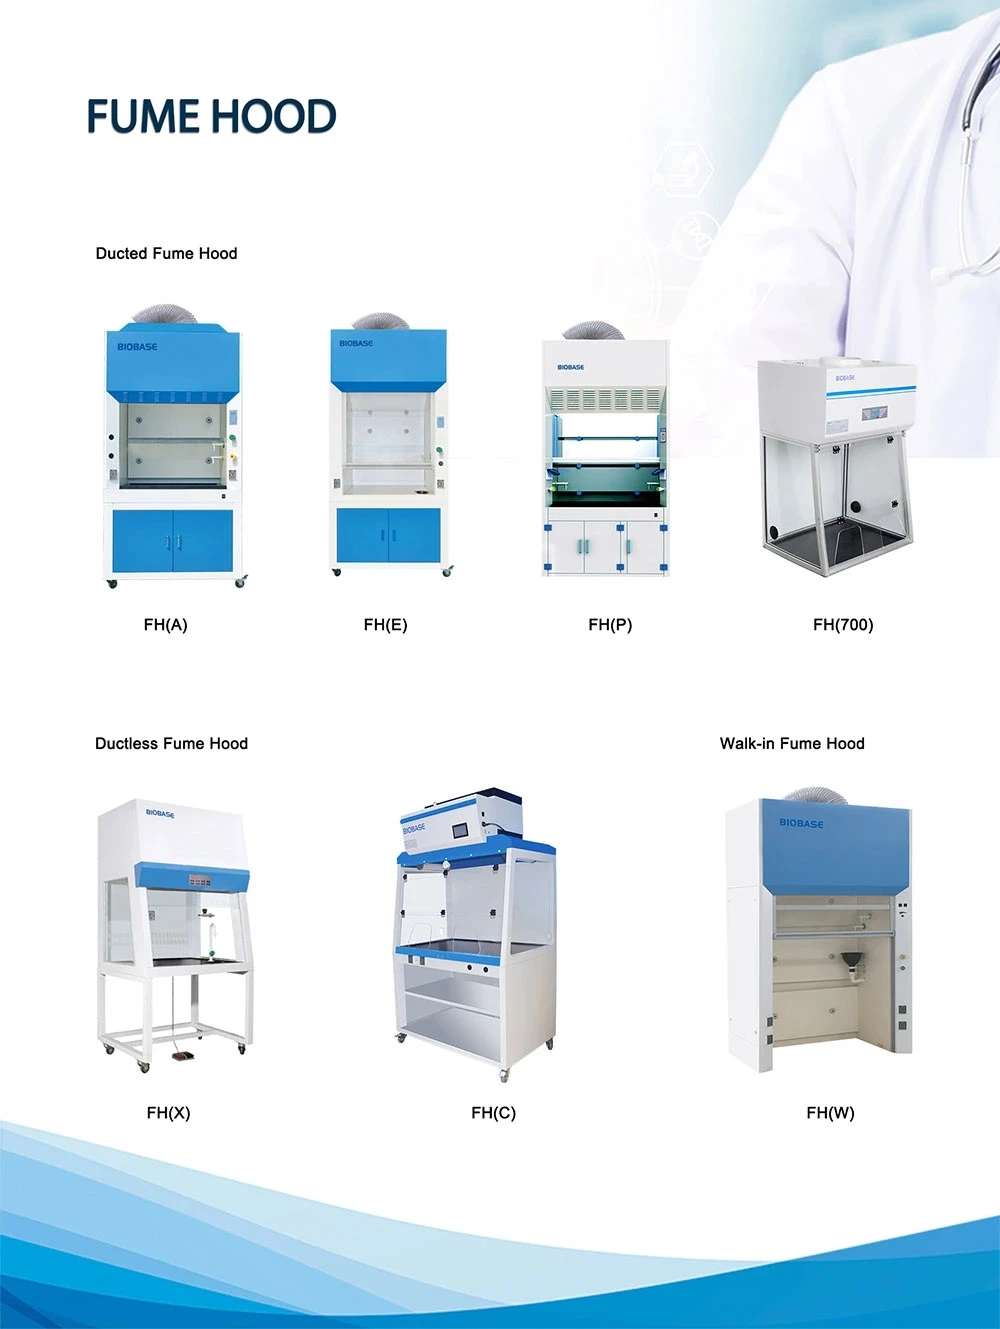 BIOBASE China Fume Hood PCR Cabinet with Active Carbon Filter Lab Ductless Fume Hood price